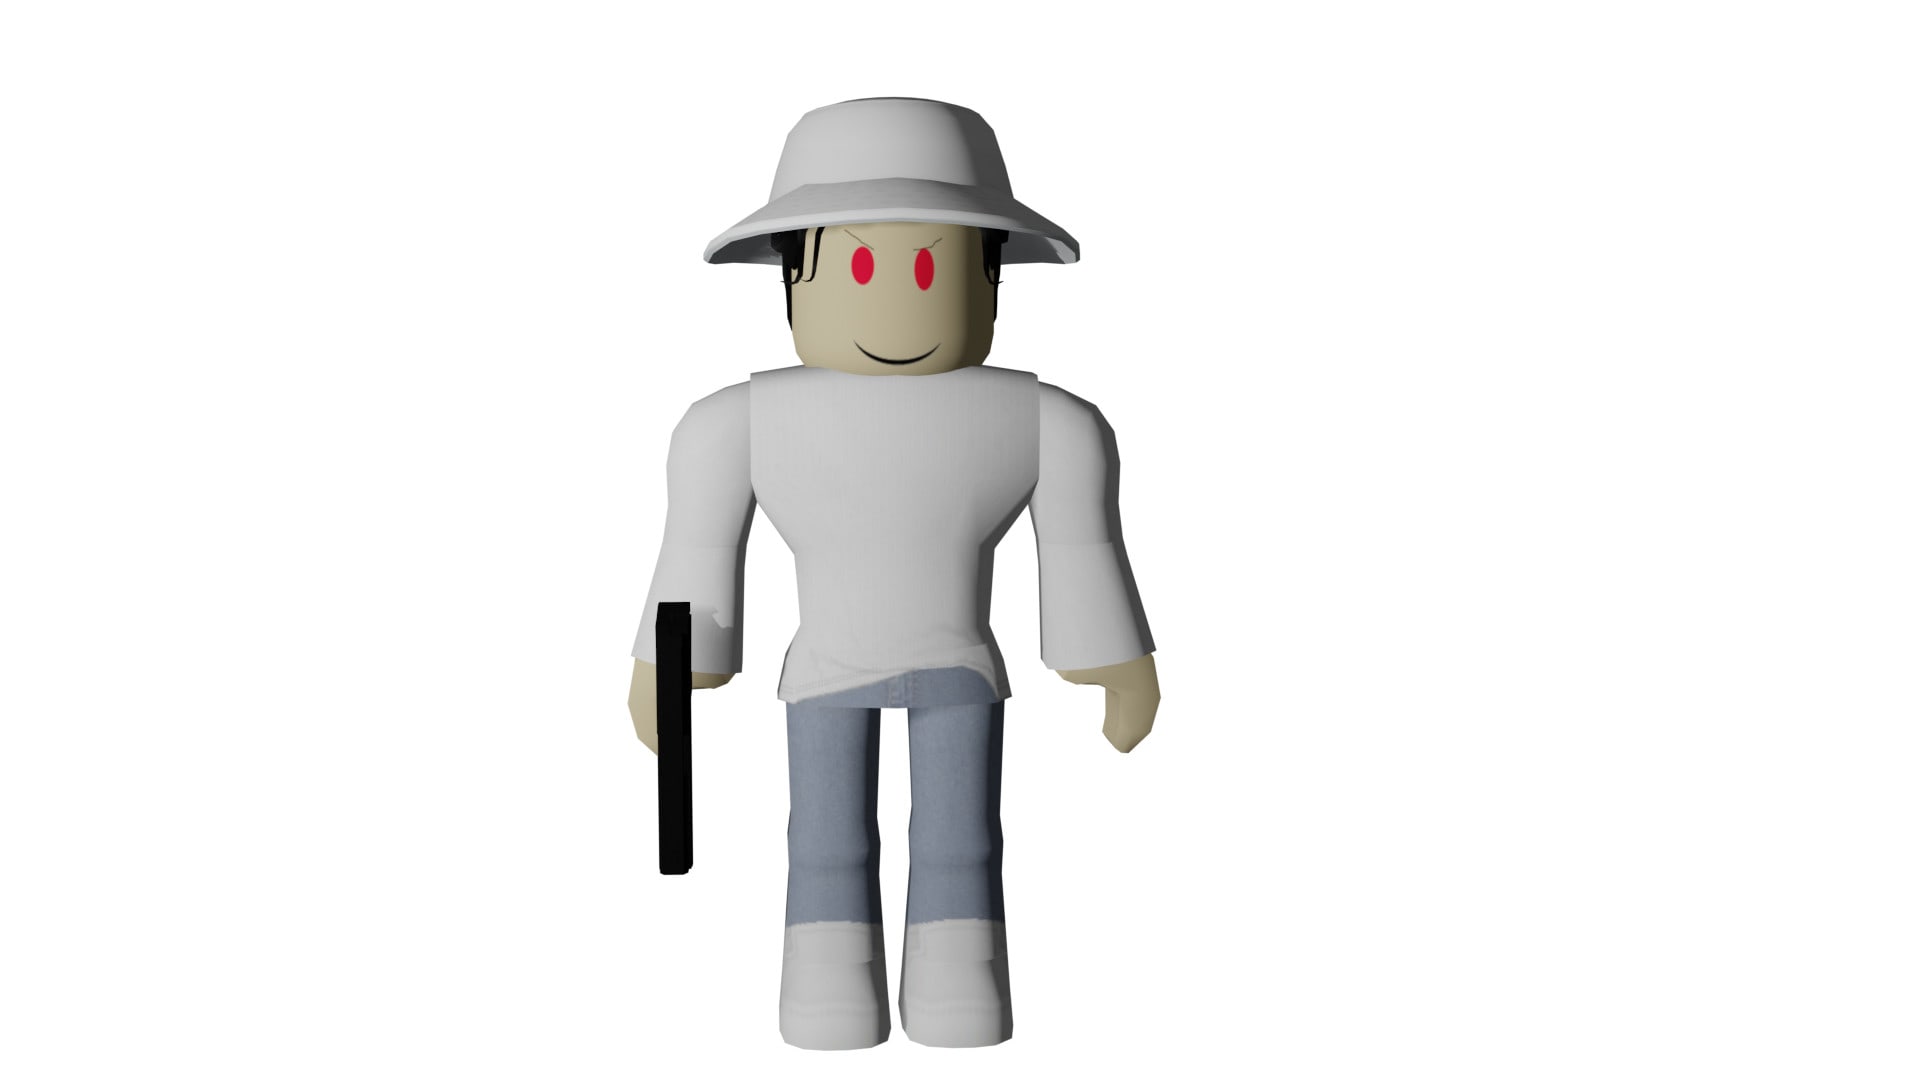 Make You A Gfx With Or Without A Face By Skelli938 - engineer hat roblox